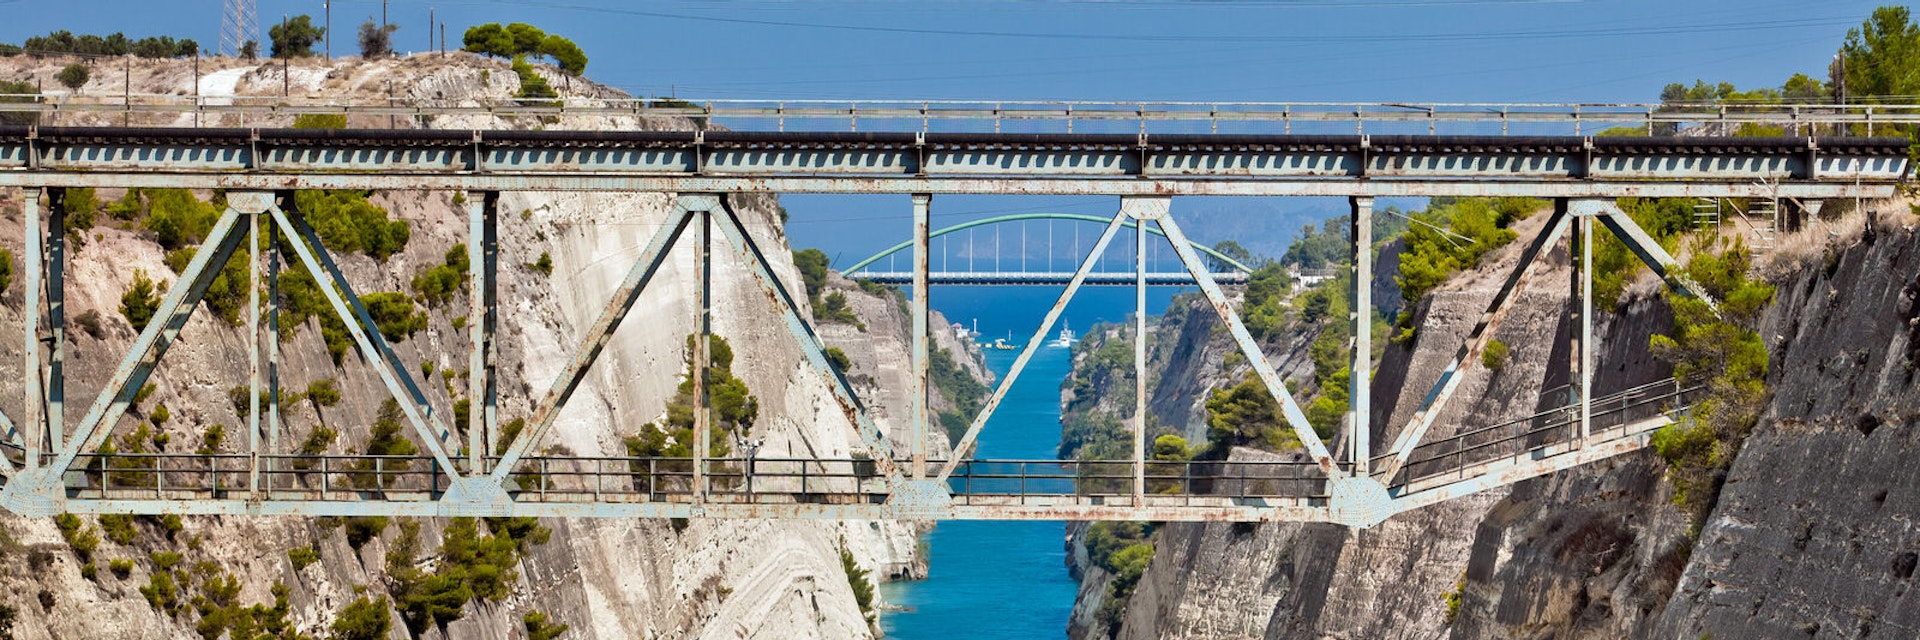 The boat crossing the Corinth channel in Greece, near Athens; Shutterstock ID 68480968; Your name (First / Last): Emma Sparks; GL account no.: 65050; Netsuite department name: Online Editorial; Full Product or Project name including edition: Best in Europe POI updates